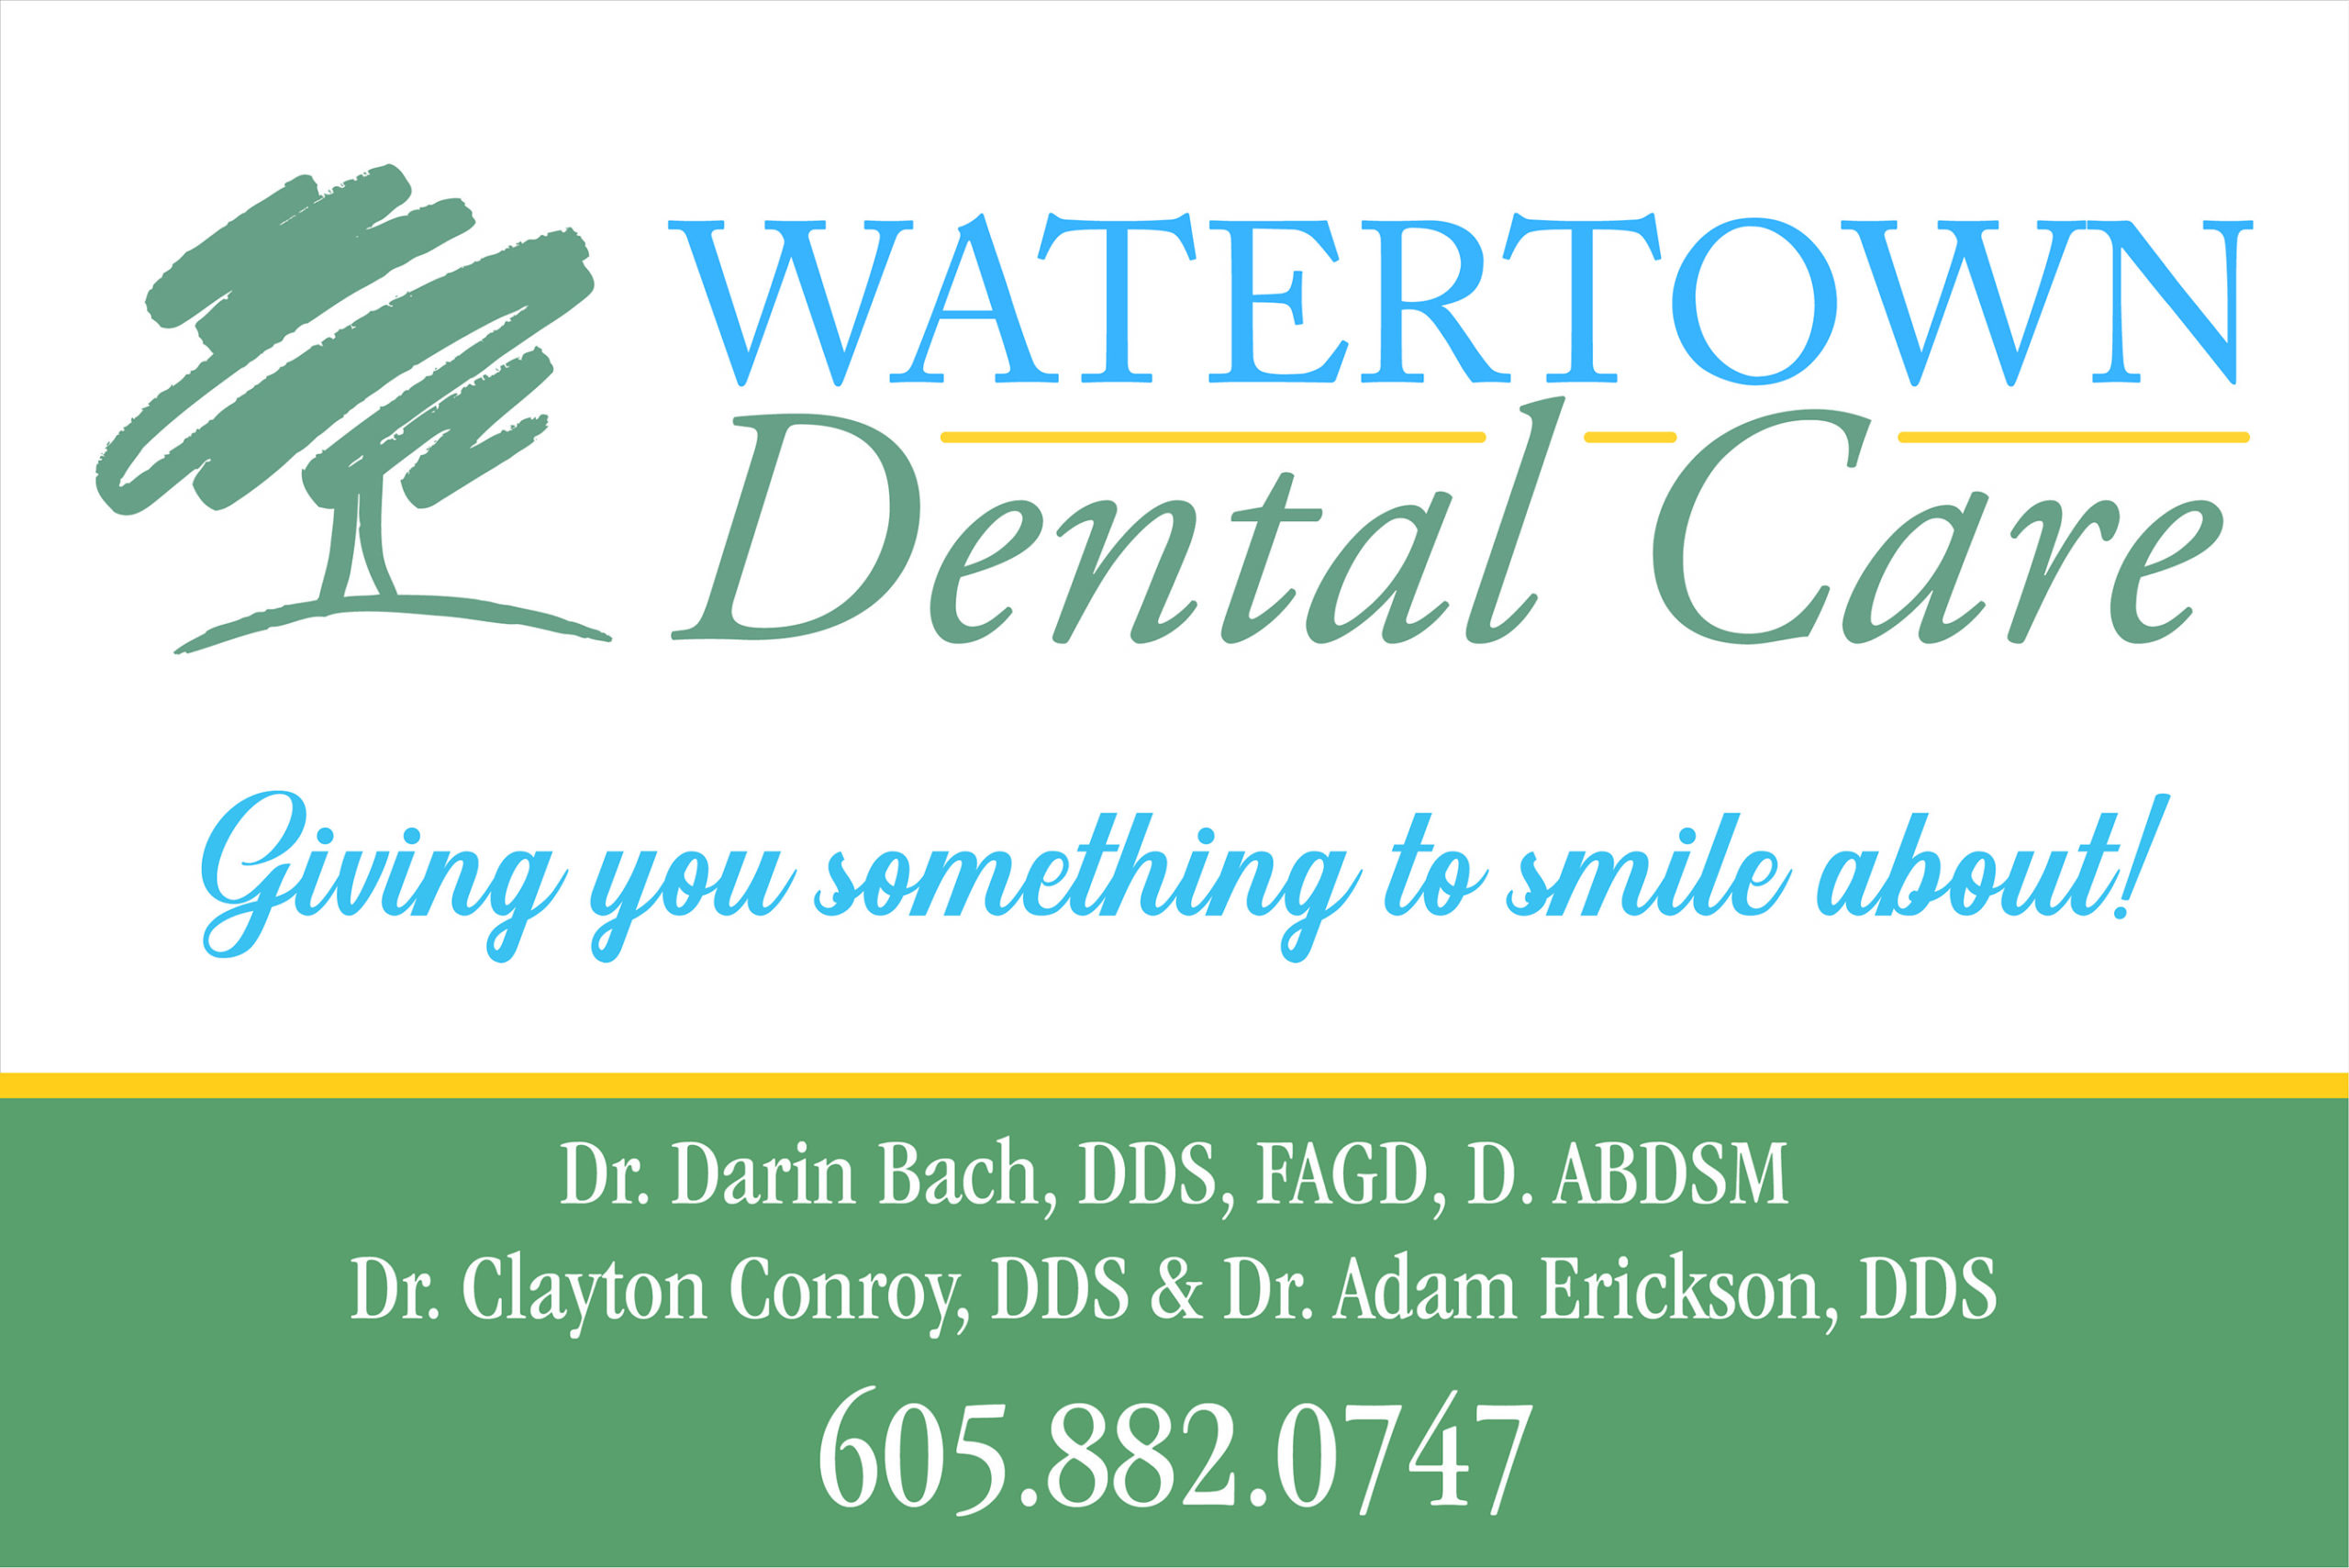 https://www.watertownsoccer.com/wp-content/uploads/sites/3290/2022/07/Watertown-Dental-Care-digital-scaled.jpg